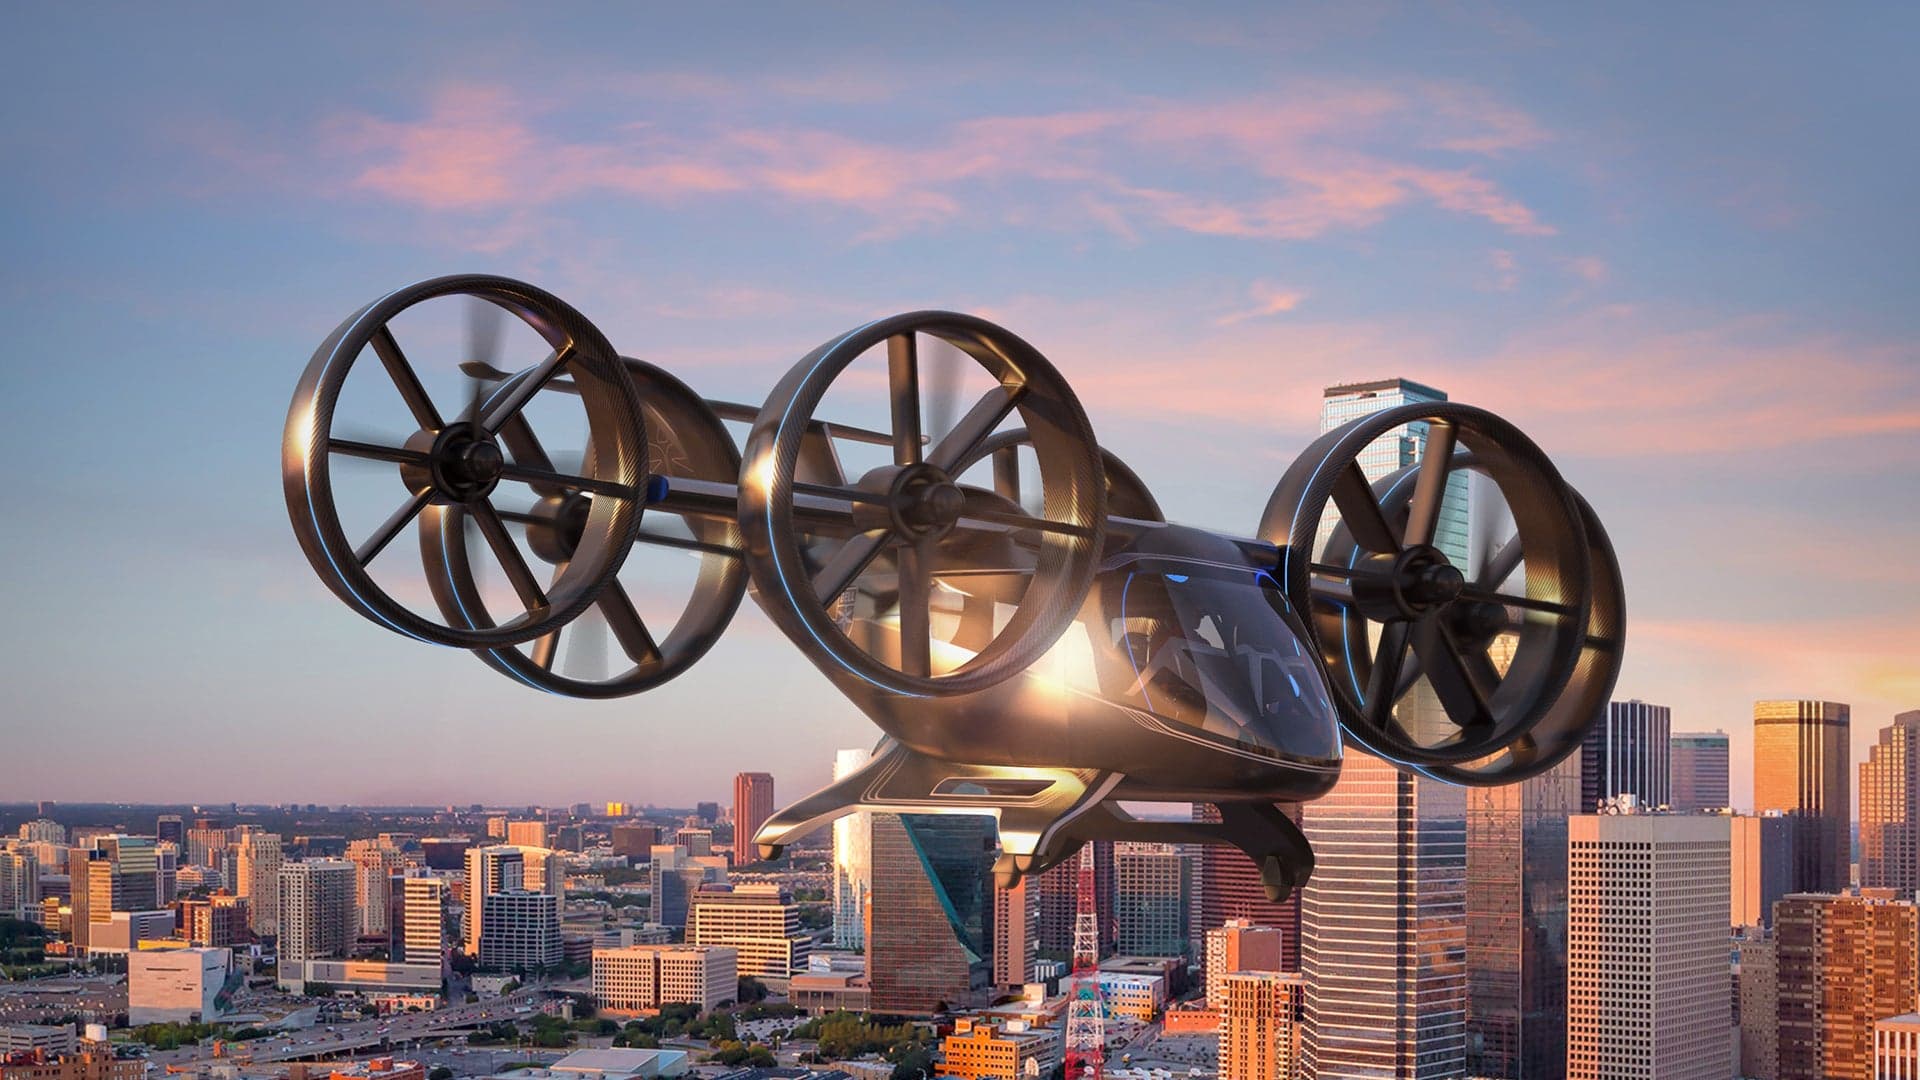 Bell Reveals the World’s First Realistic Air Taxi Concept at CES 2019